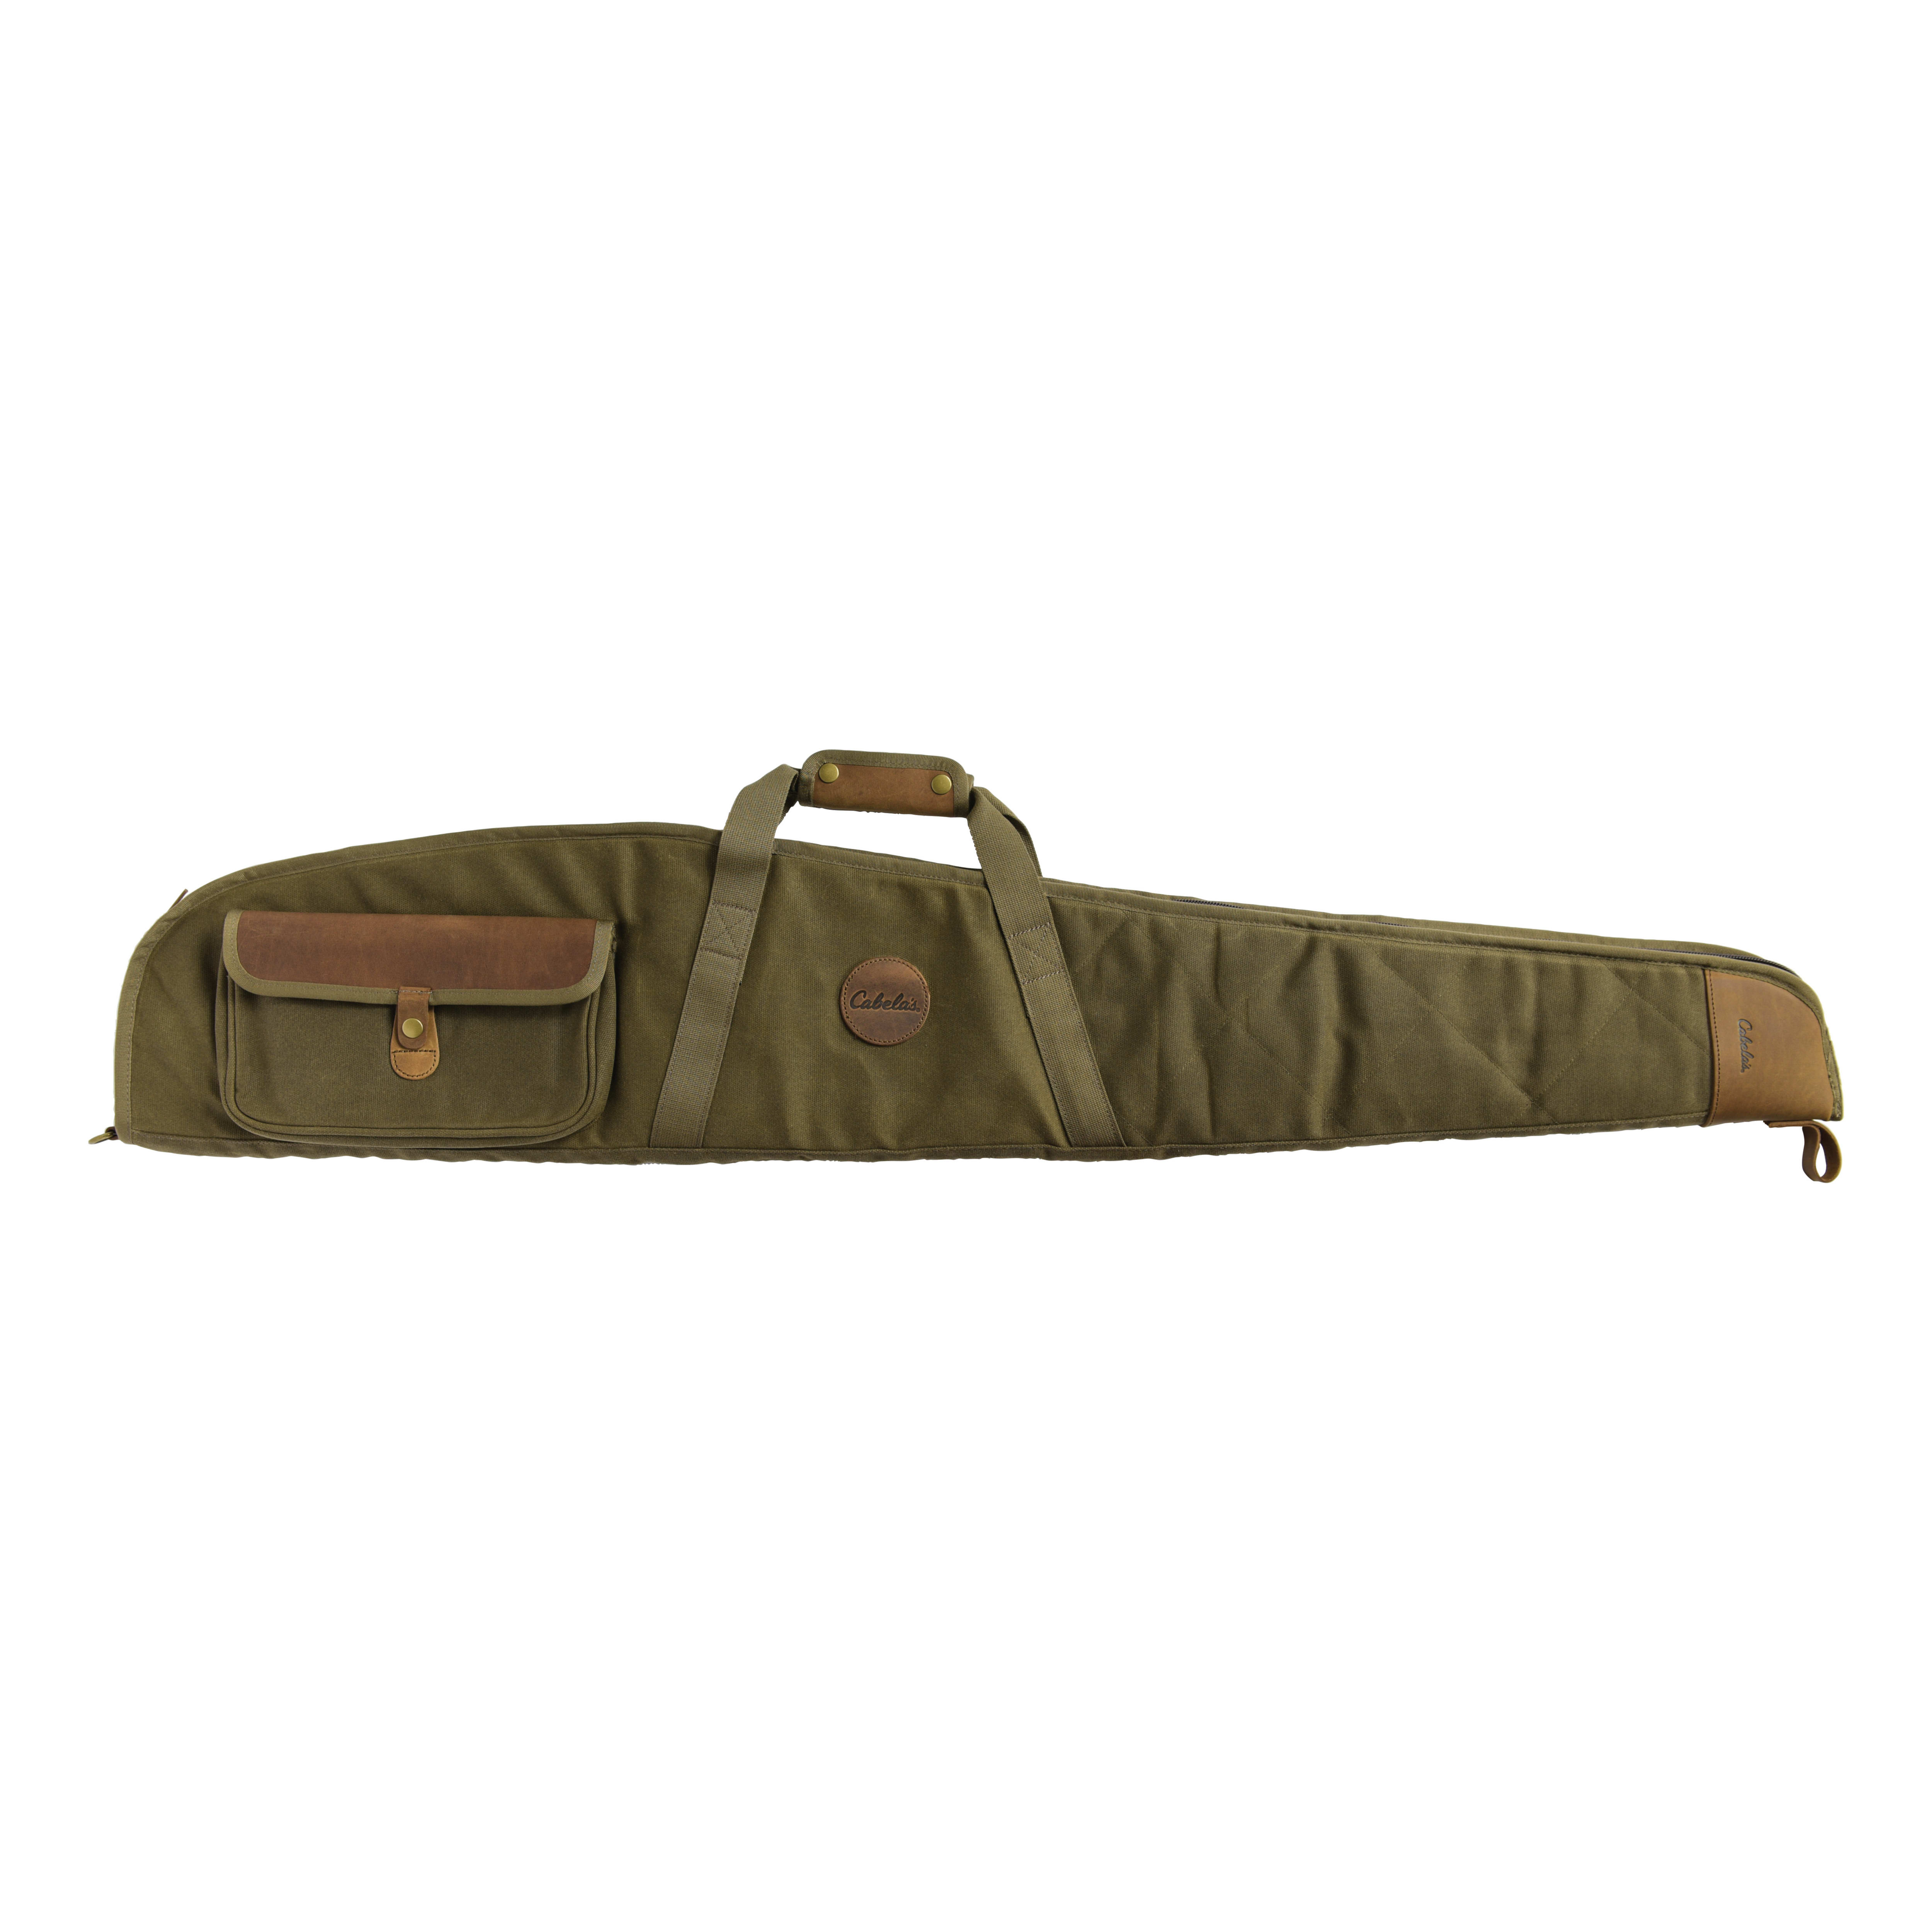 Cabela’s Deluxe Waxed Canvas Leather Rifle Case